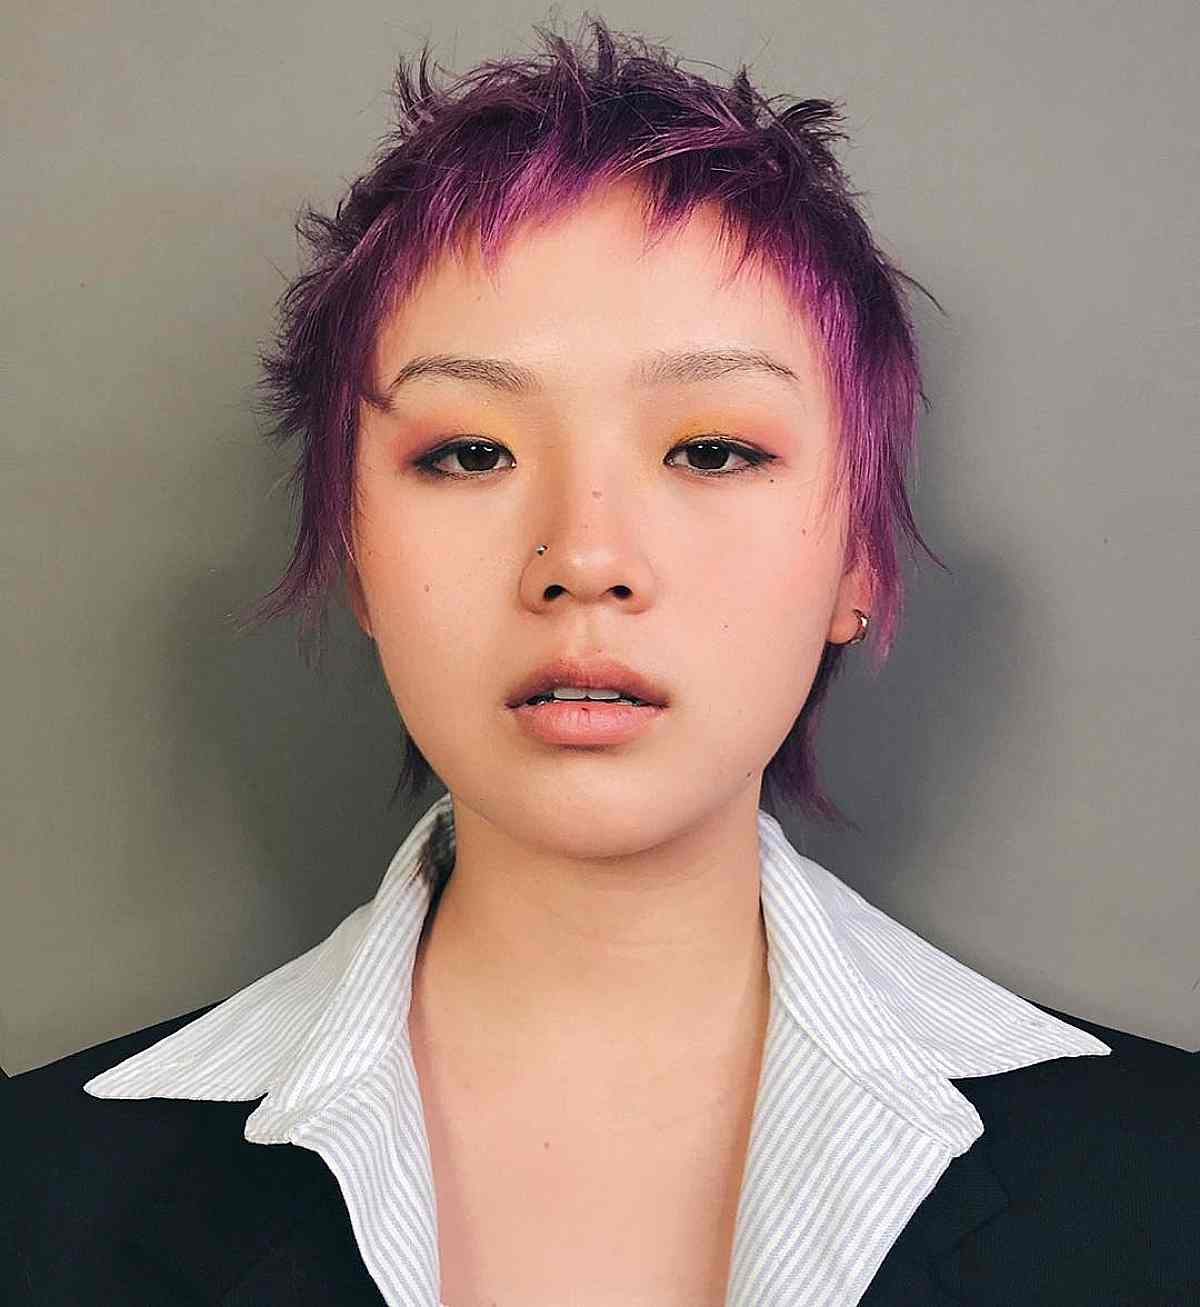 Asian girl wearing messy pixie hairstyle